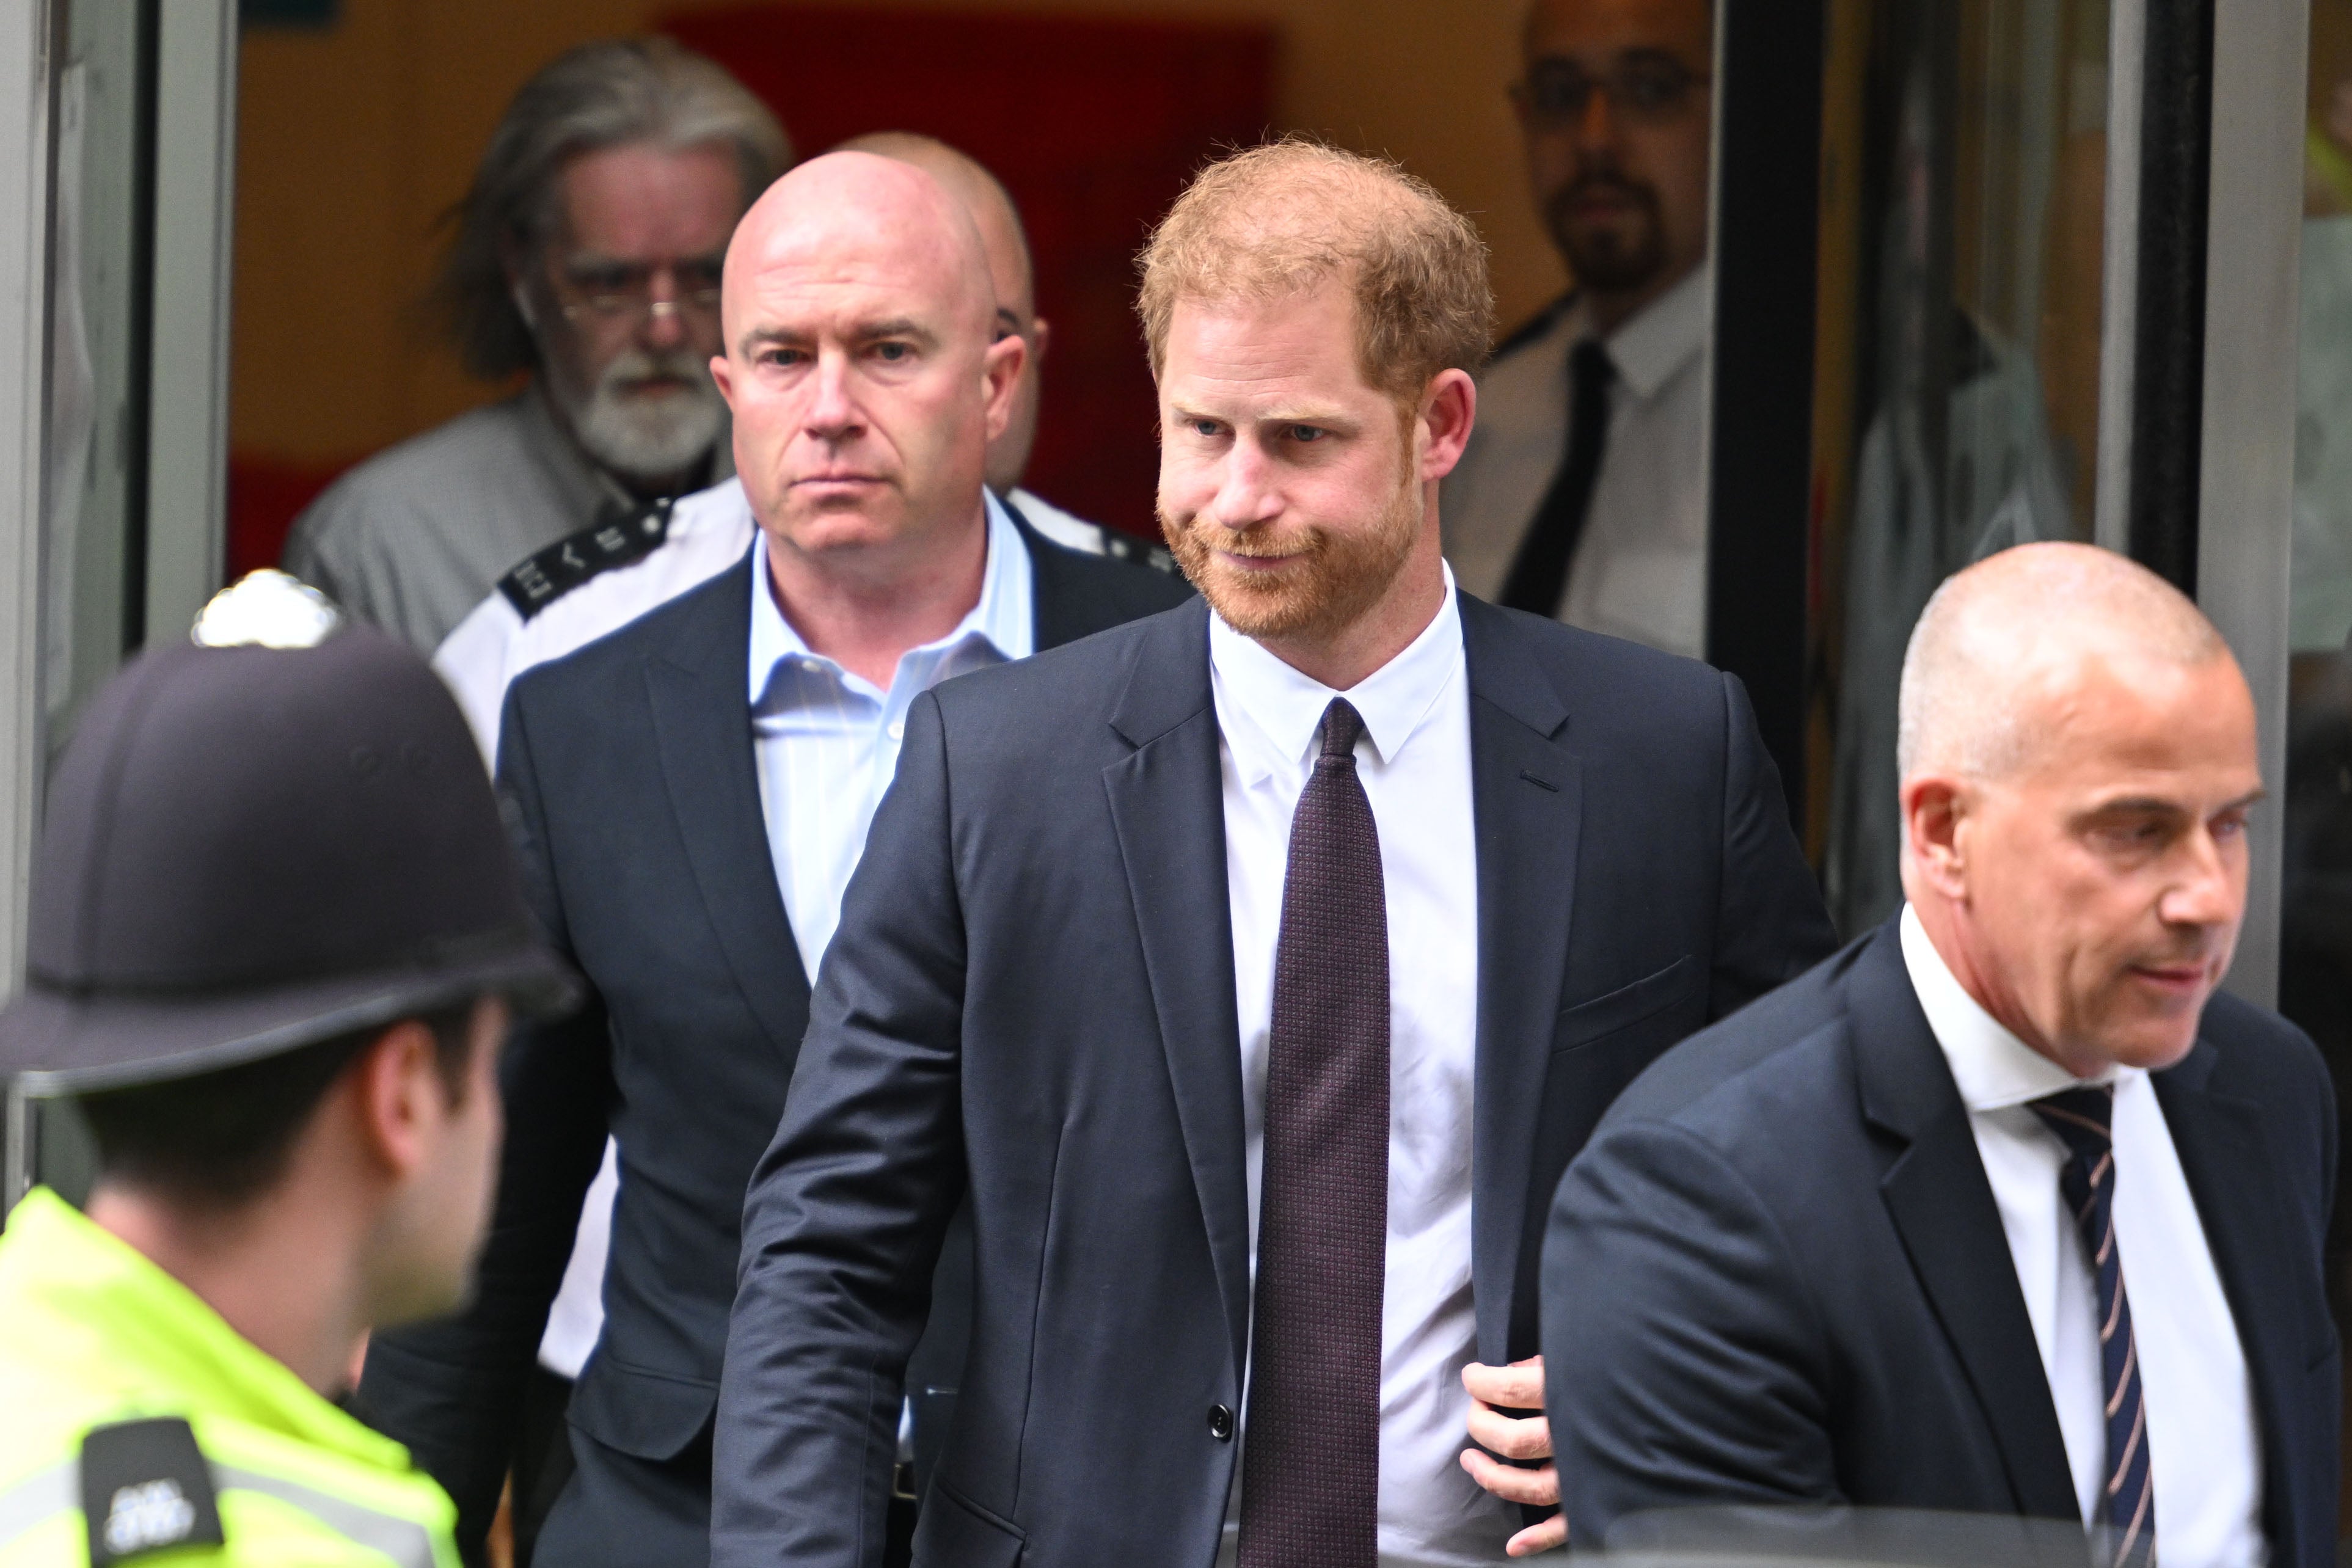 Prince Harry leaves after giving evidence at the Mirror Group Phone hacking trial